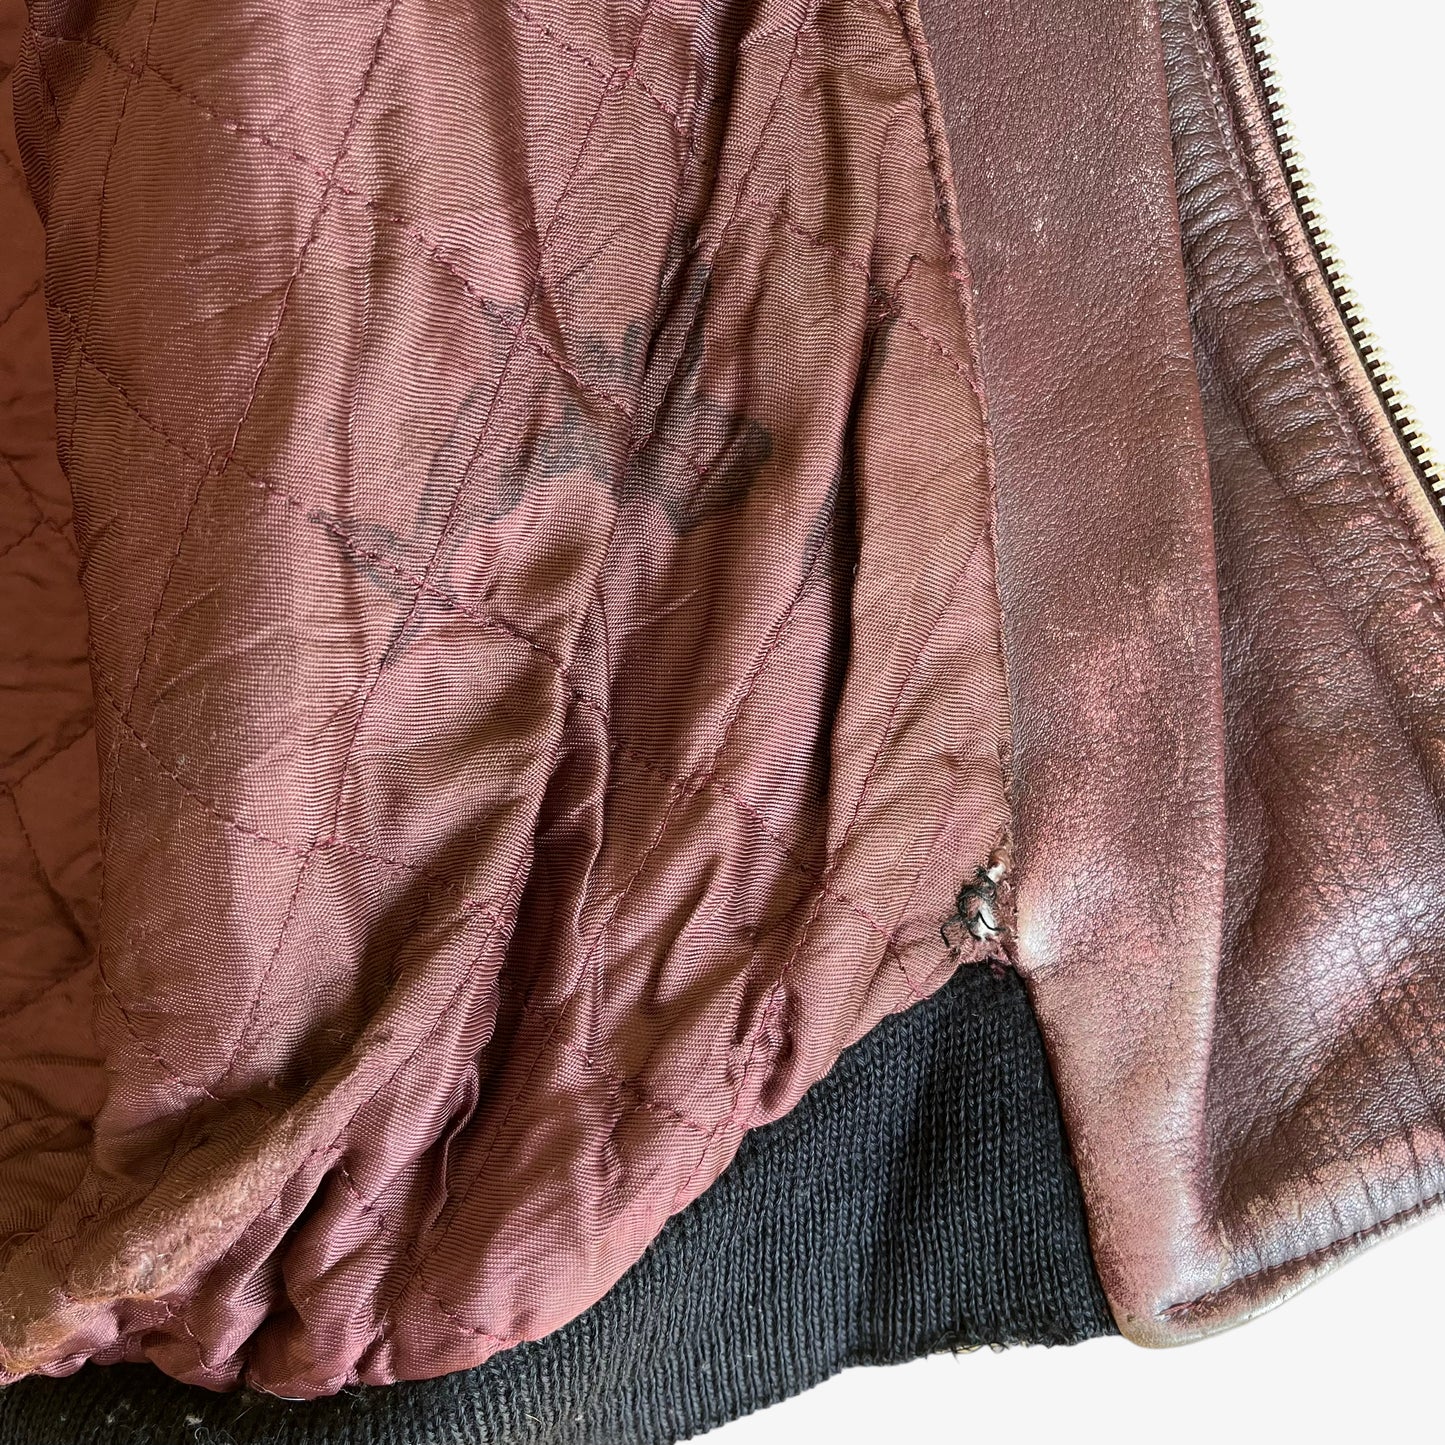 Vintage 90s Chevignon Burgundy Leather Jacket With Back Spell Out Inside - Casspios Dream